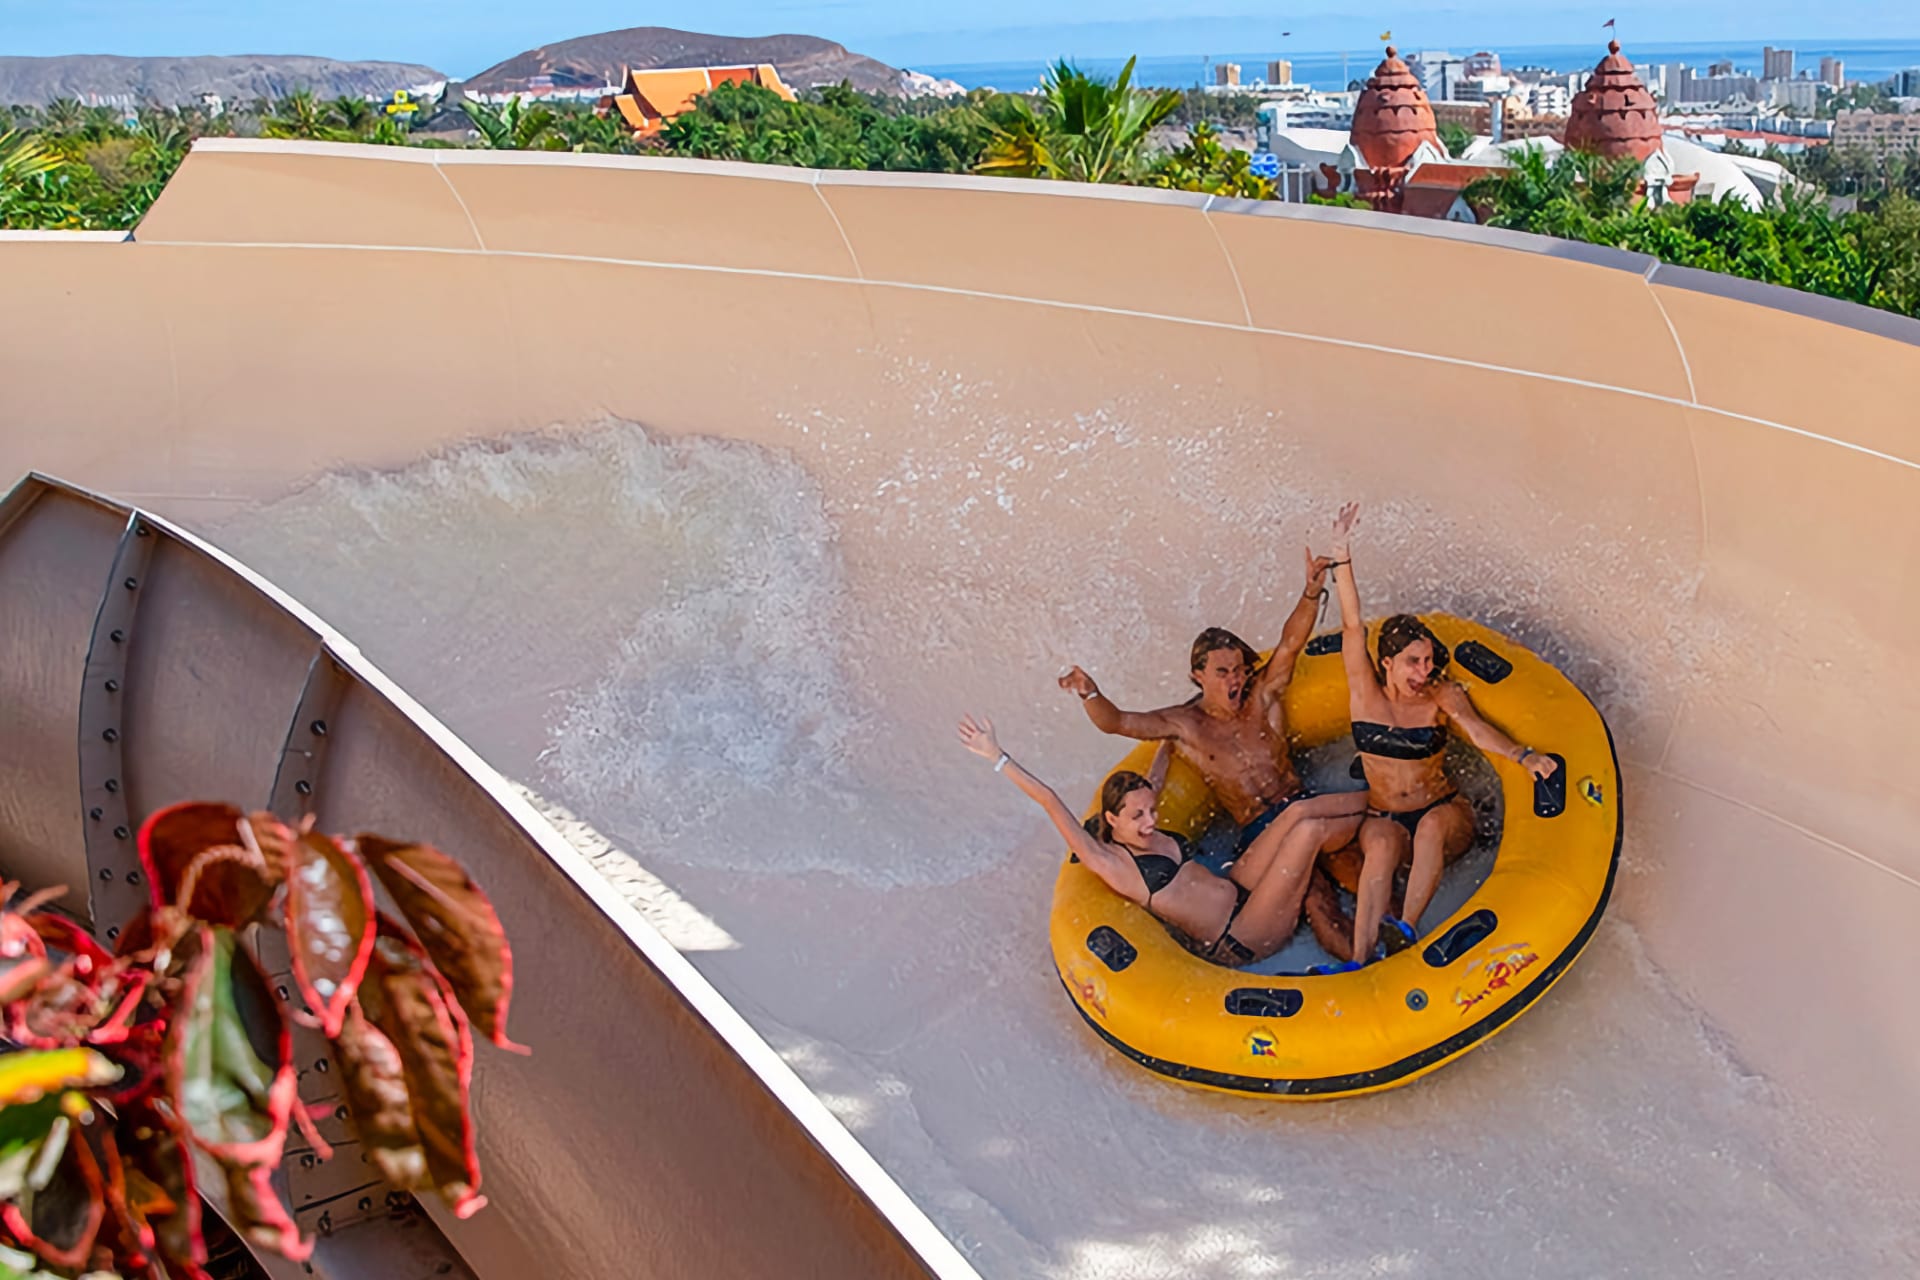 Siam Park's Slides by Height Requirements